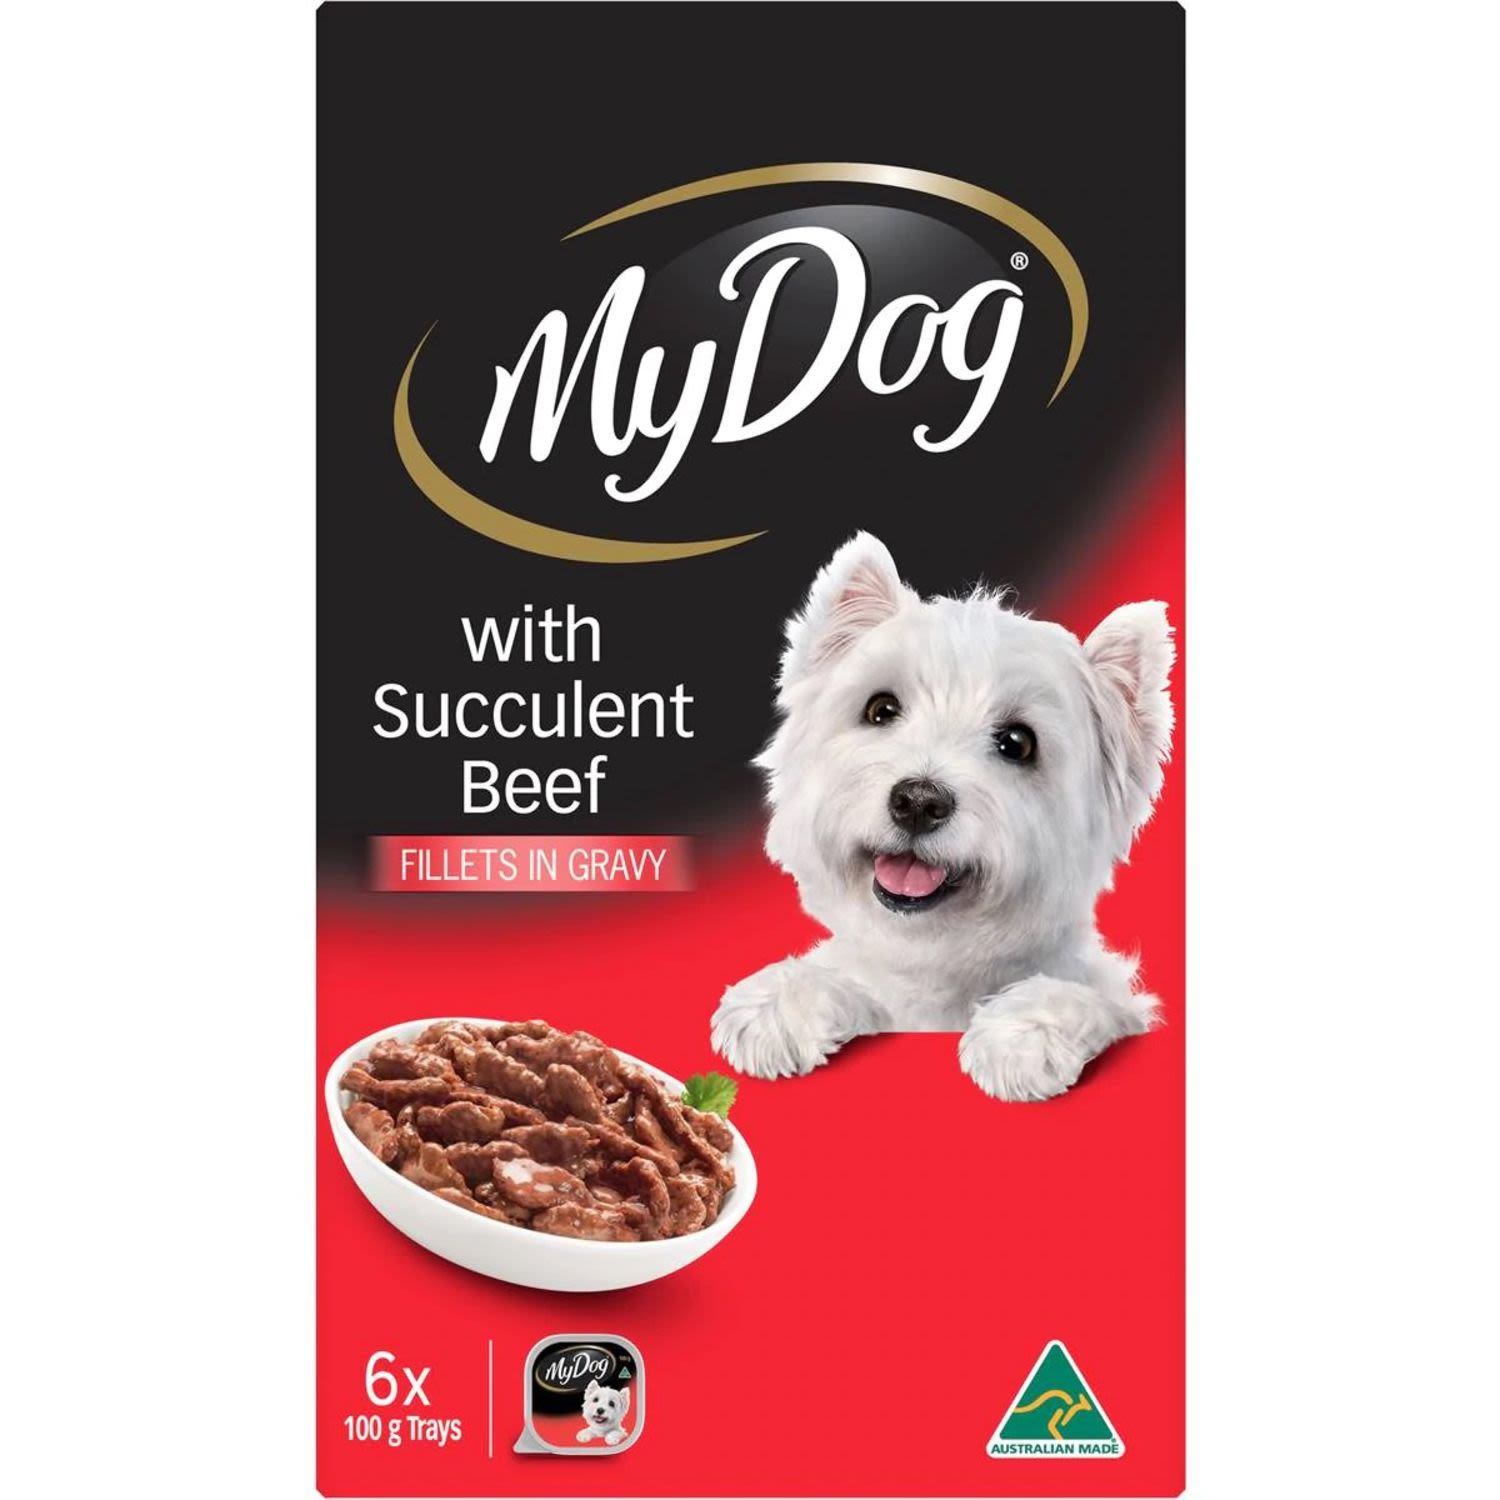 My Dog Fillets In Gravy With Succulent Beef Wet Dog Food, 6 Each